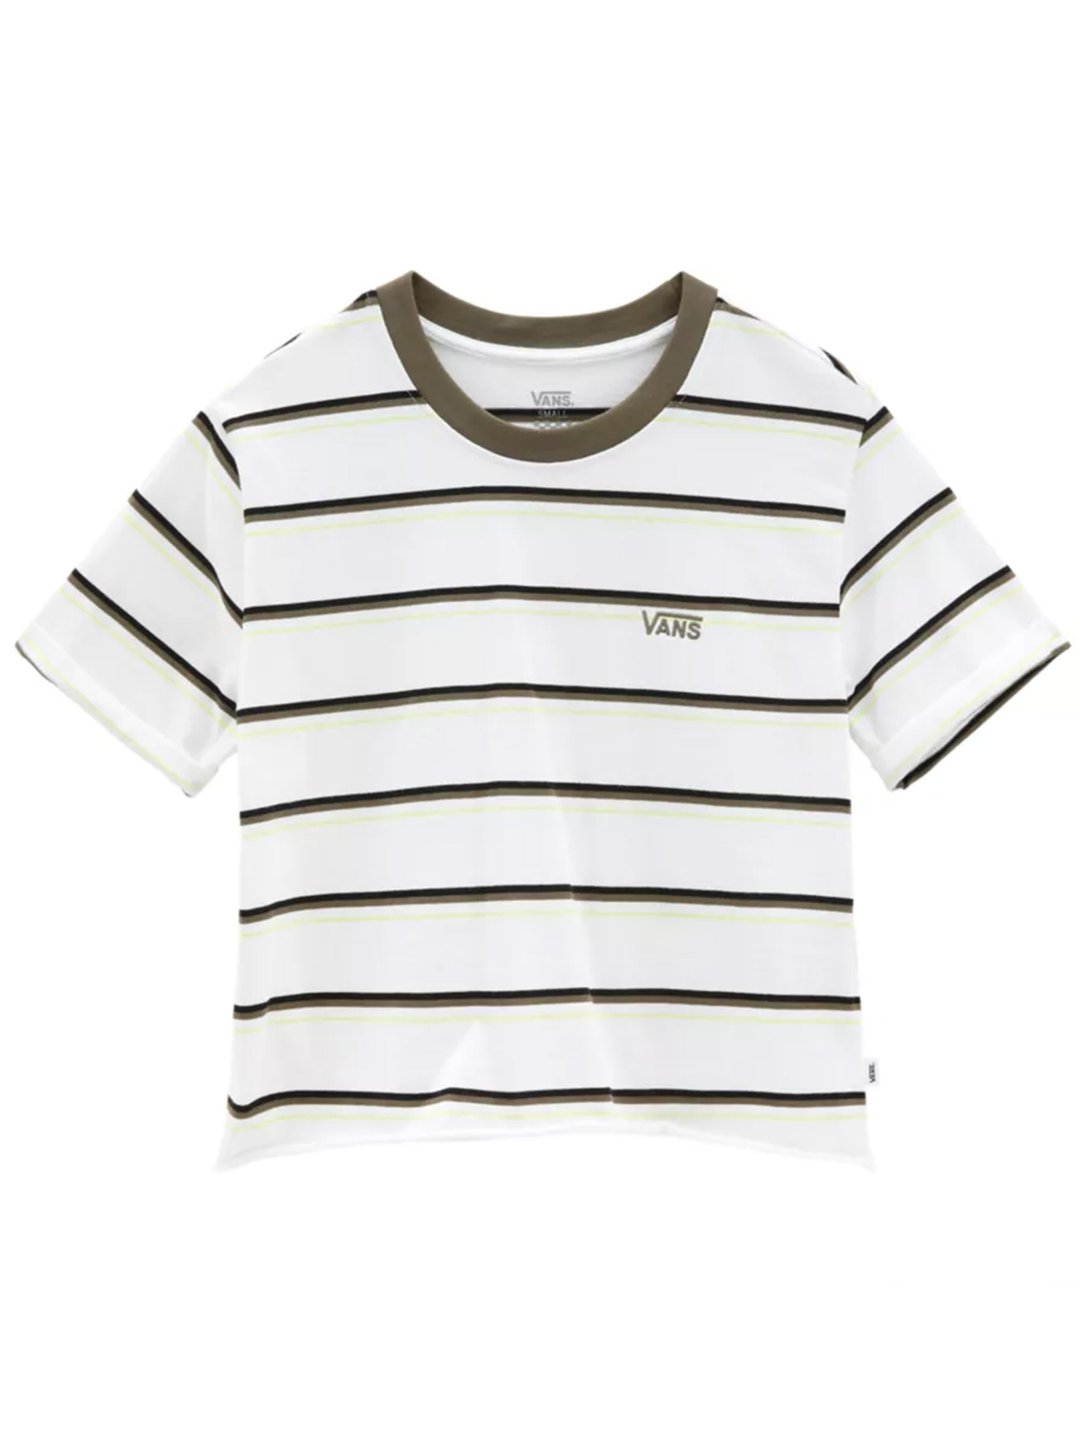 VANS SURF SUPPLY ROLL OUT TEE